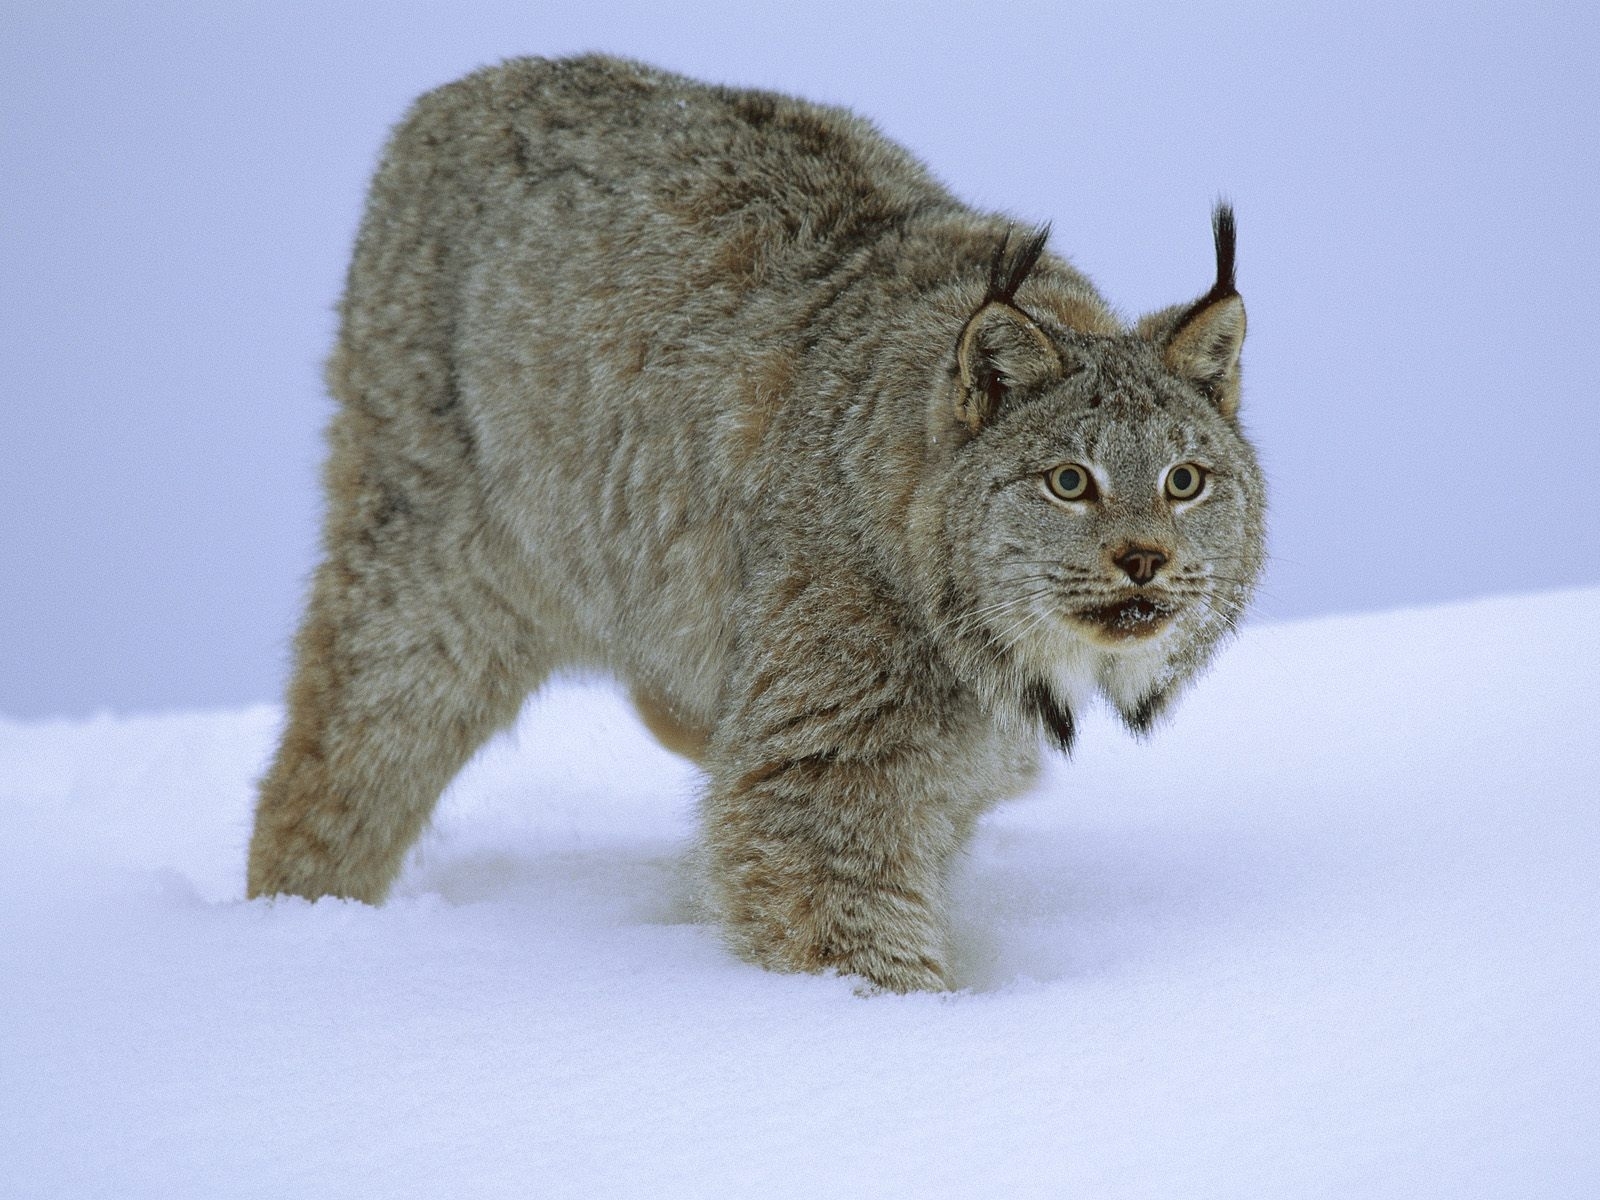 bobcats, animals, winter, snow cell phone wallpapers